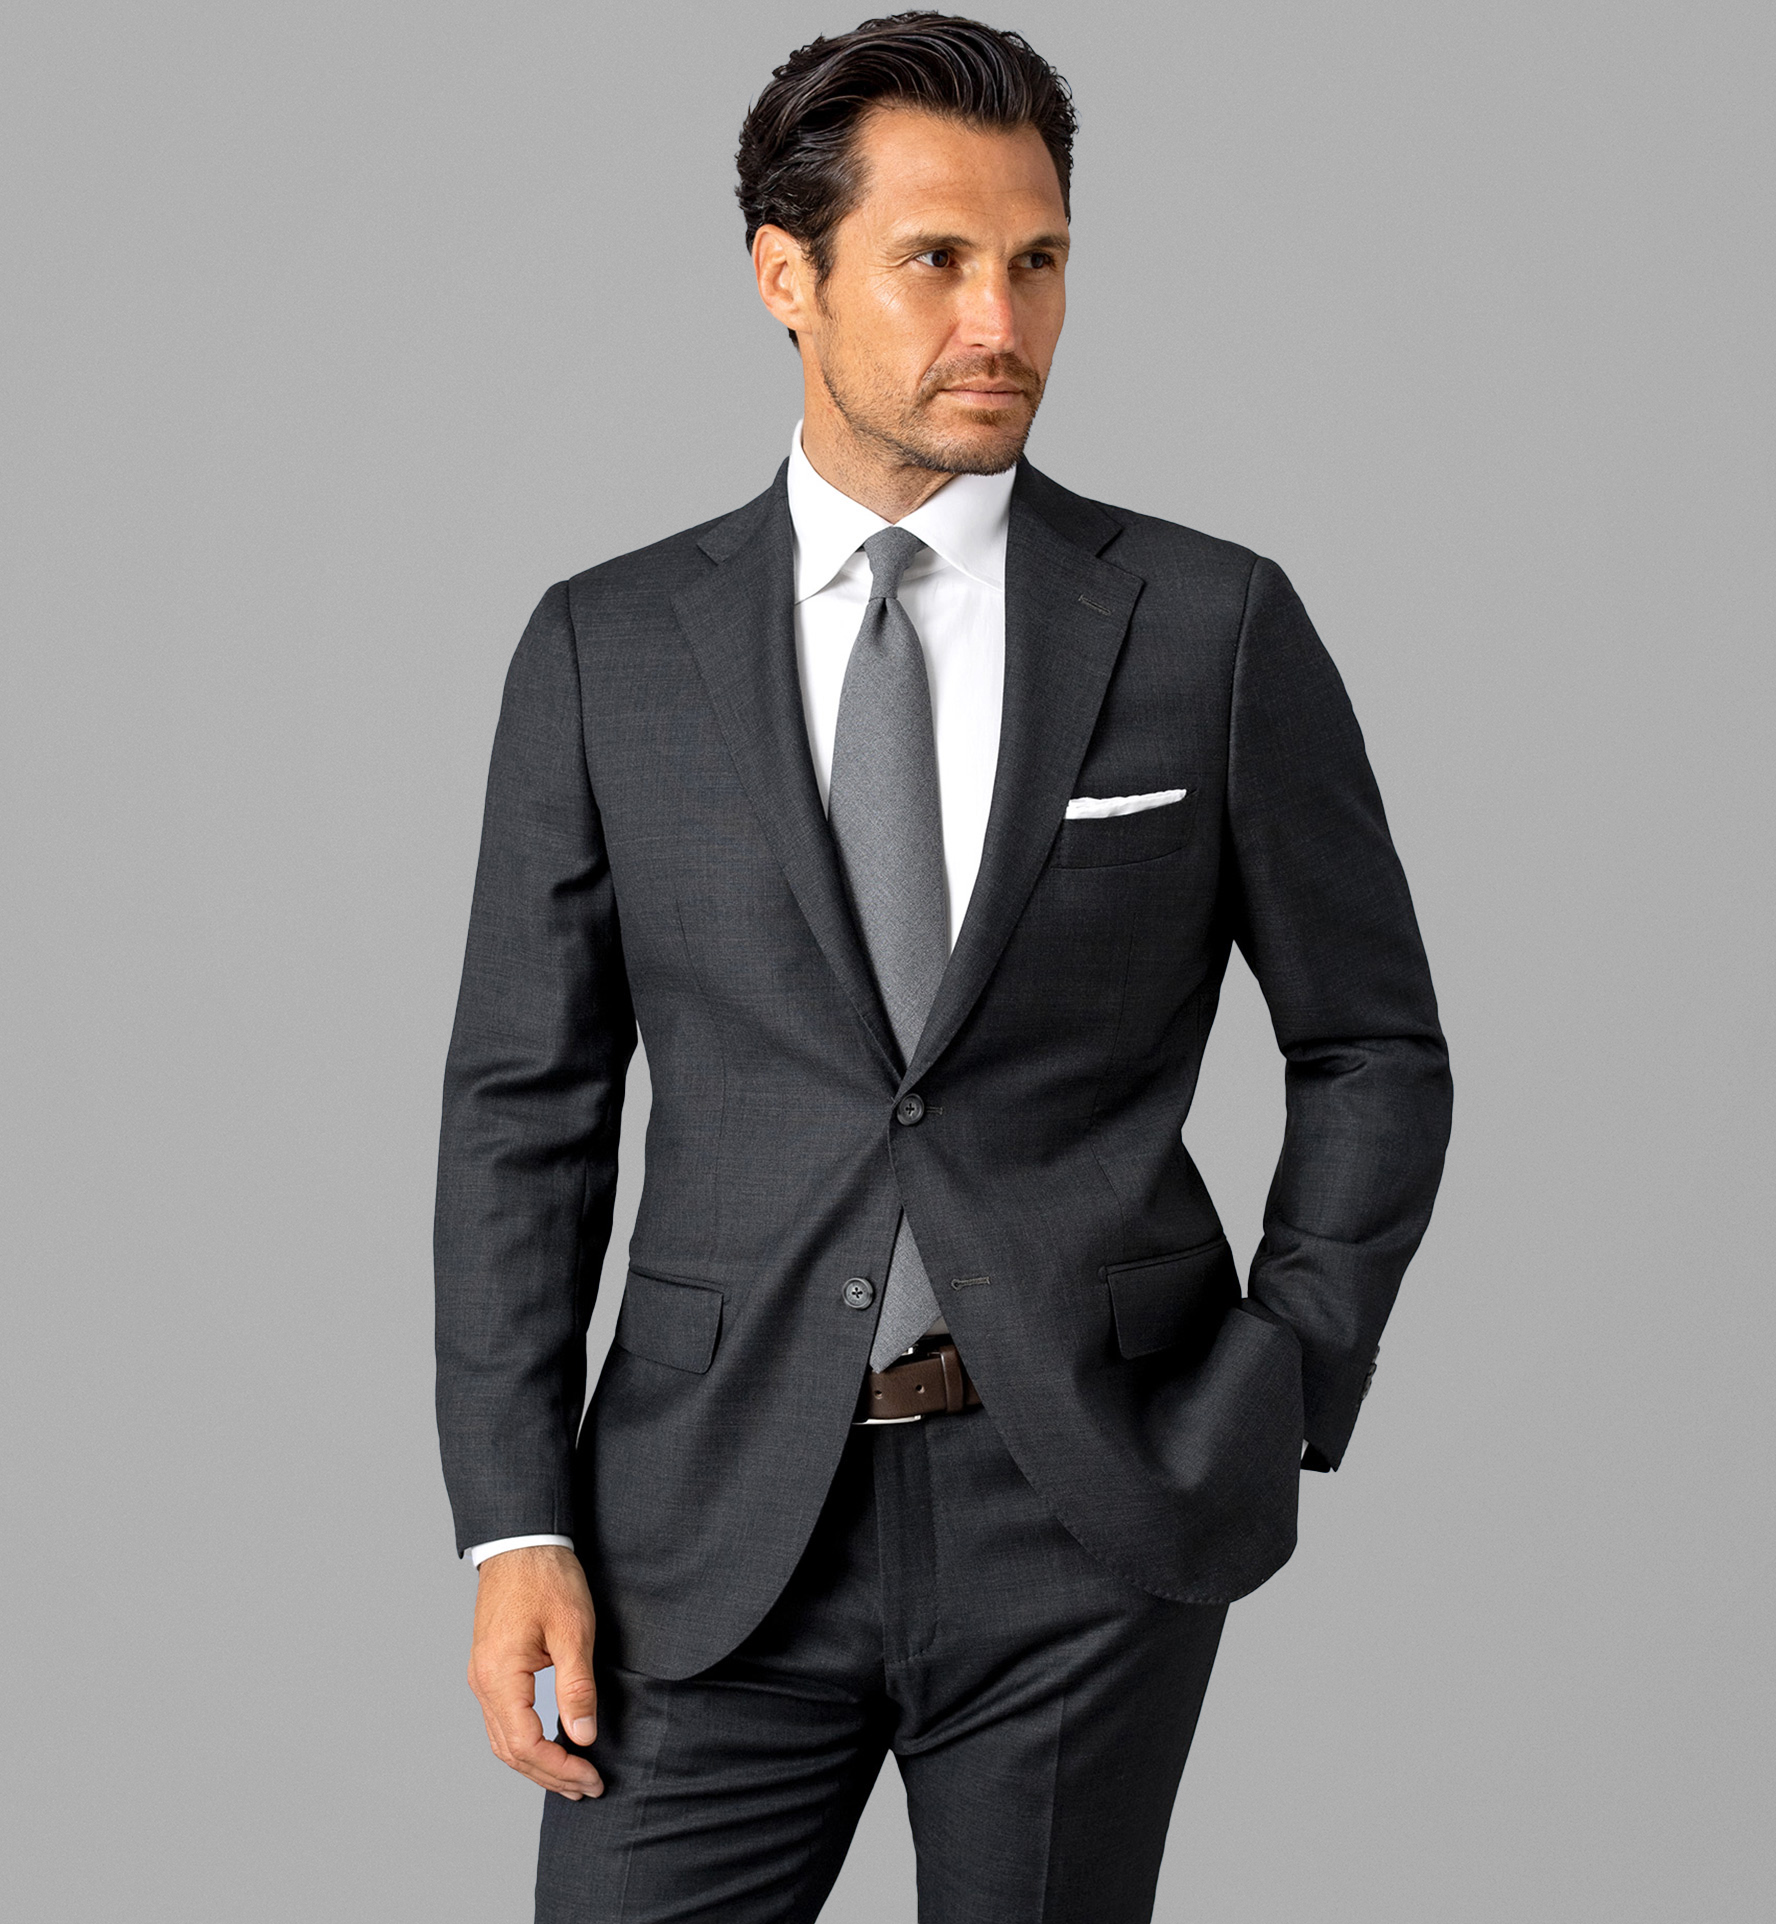 Allen Grey Wool Suit - Custom Fit Tailored Clothing